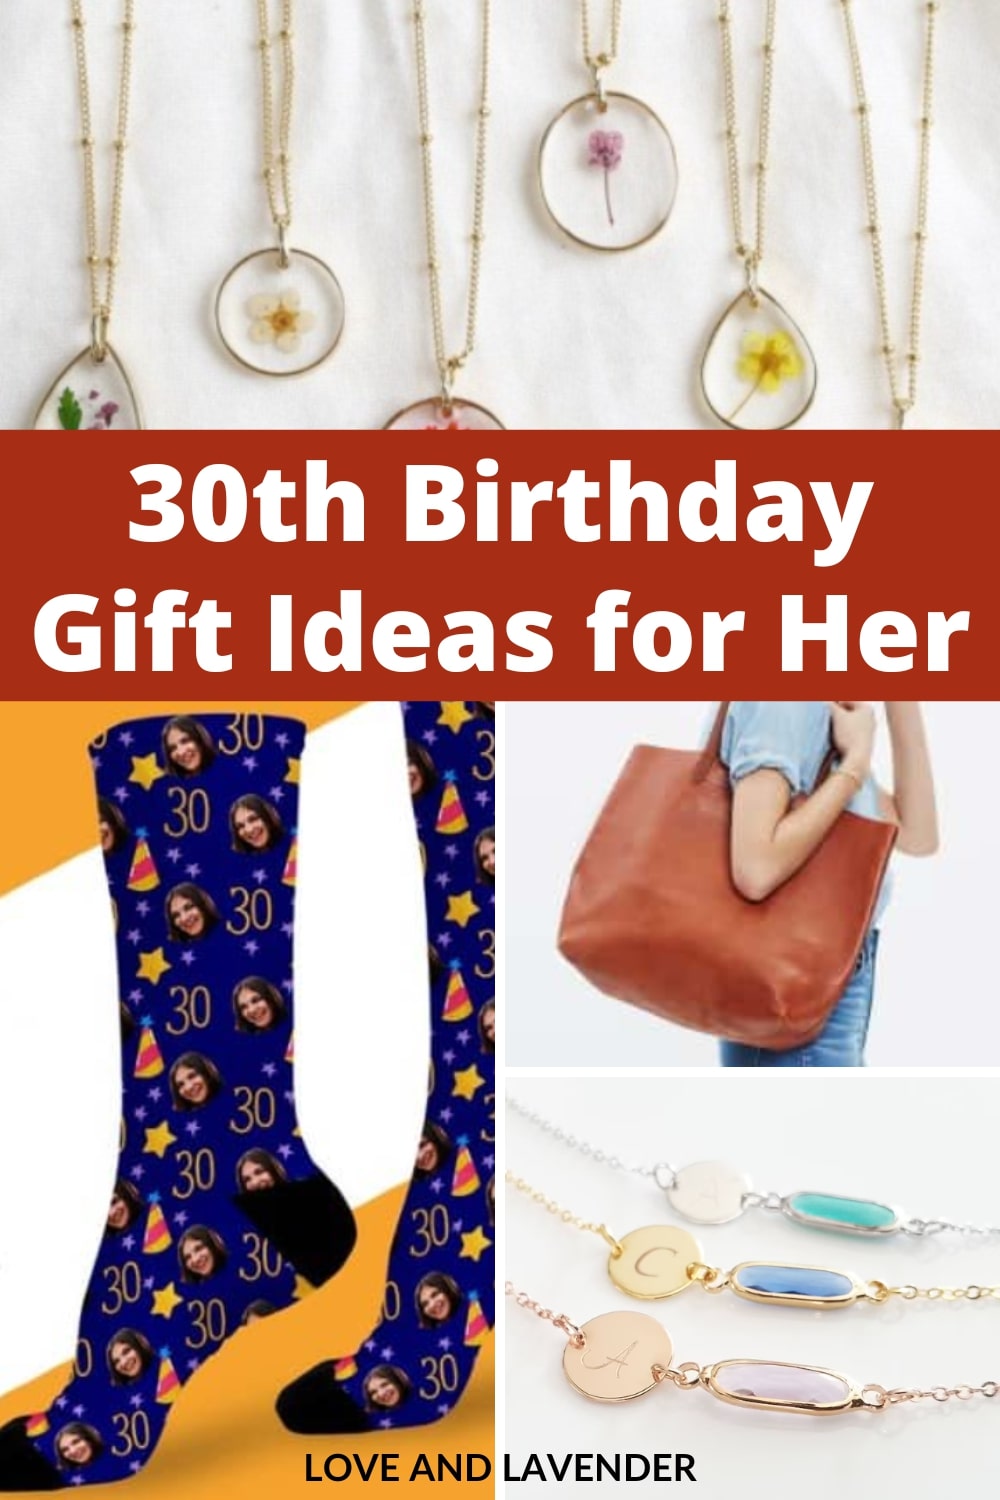 15 Creative 30th Birthday Gift Ideas for Her